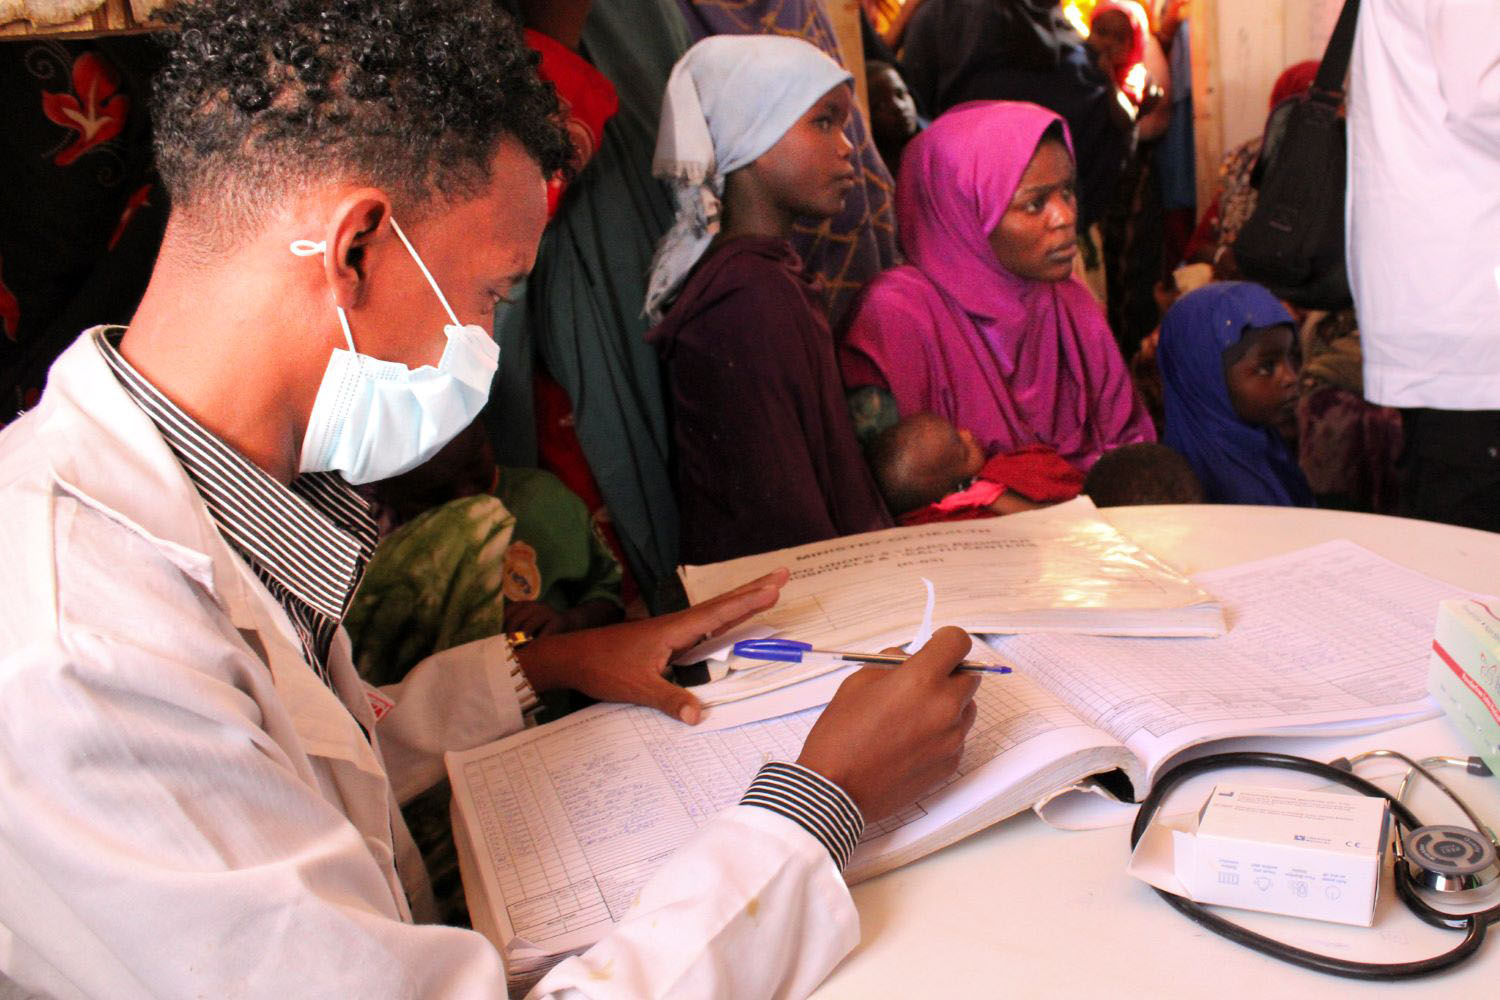  Sitting at the table and recording the childrenâs names and vaccinations is Dr. Bashir Ali. The Jawle Health Center in Garowe